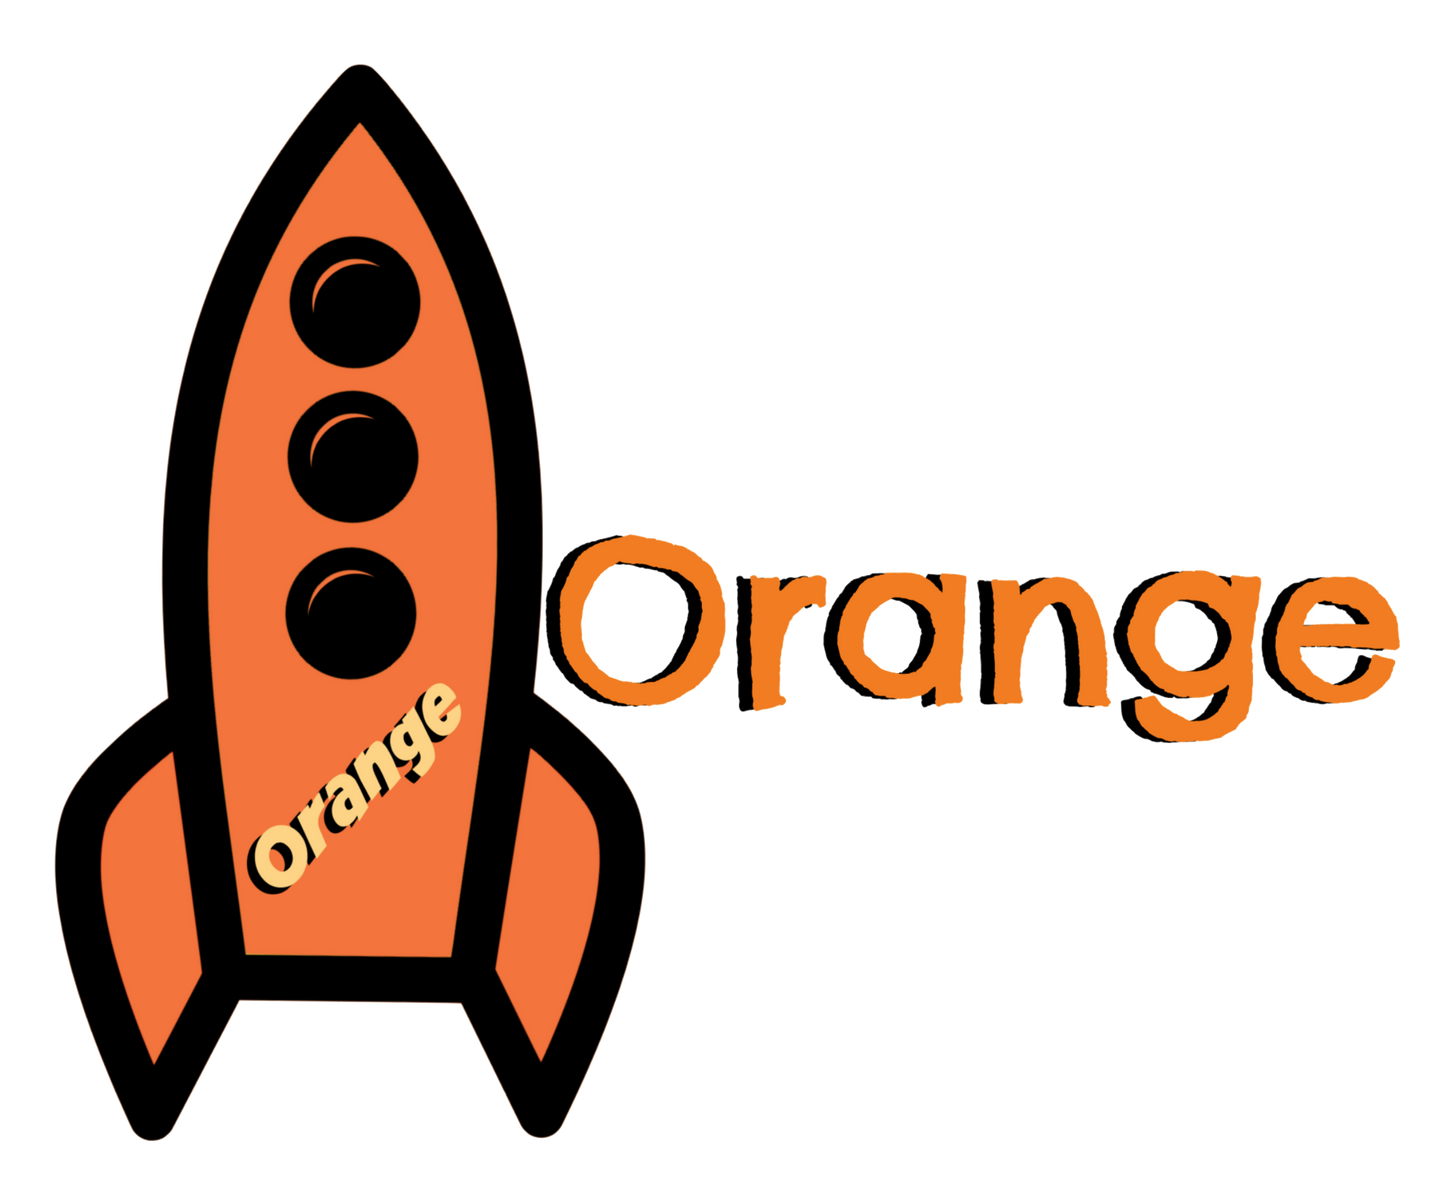 Teachers Kit - Learning Colors with Space Rockets